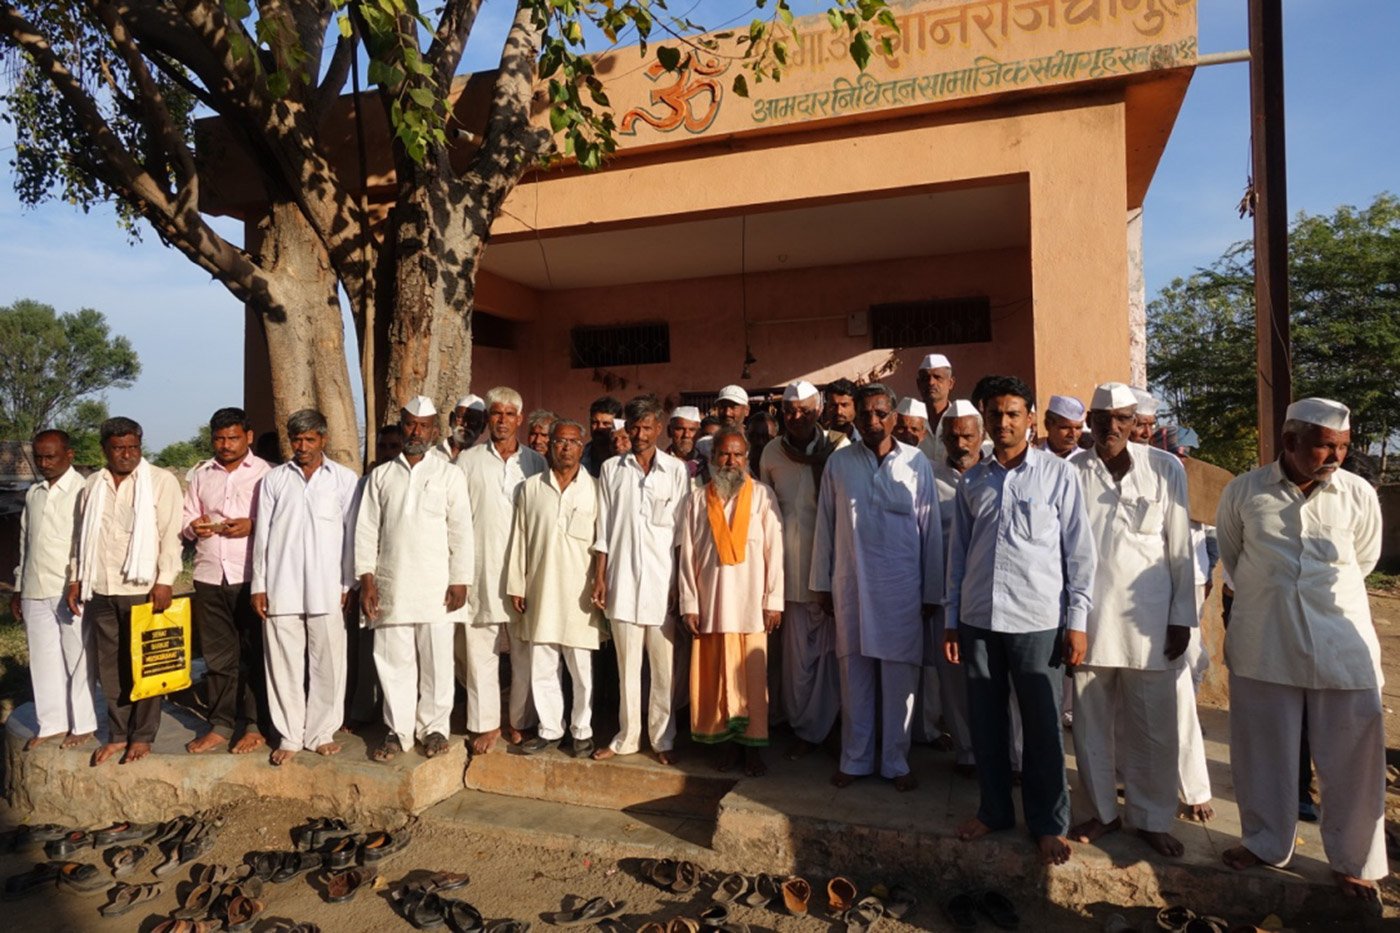 Farmers standing in front of Osamabad District Central Operative Bank